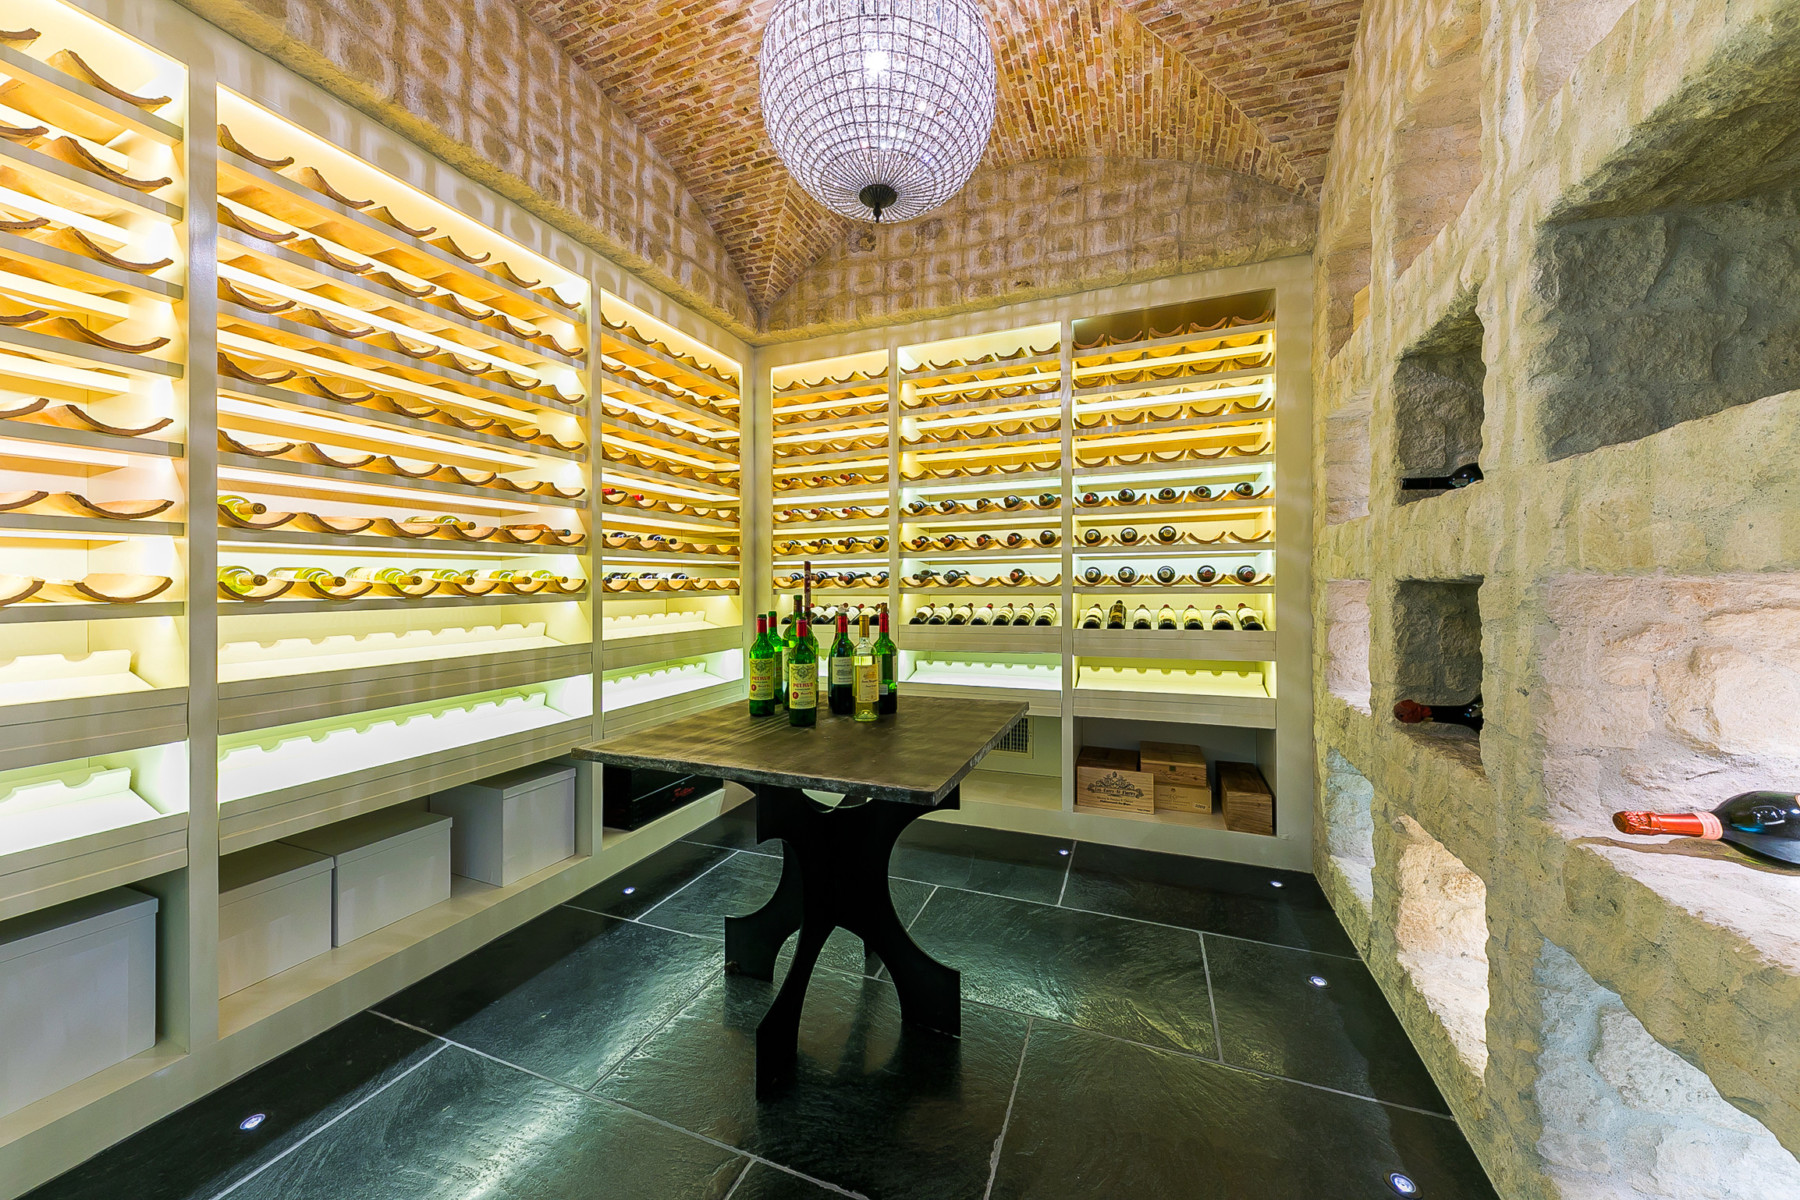 The Malibu home features a glamorous wine cellar that can house dozens of bottles